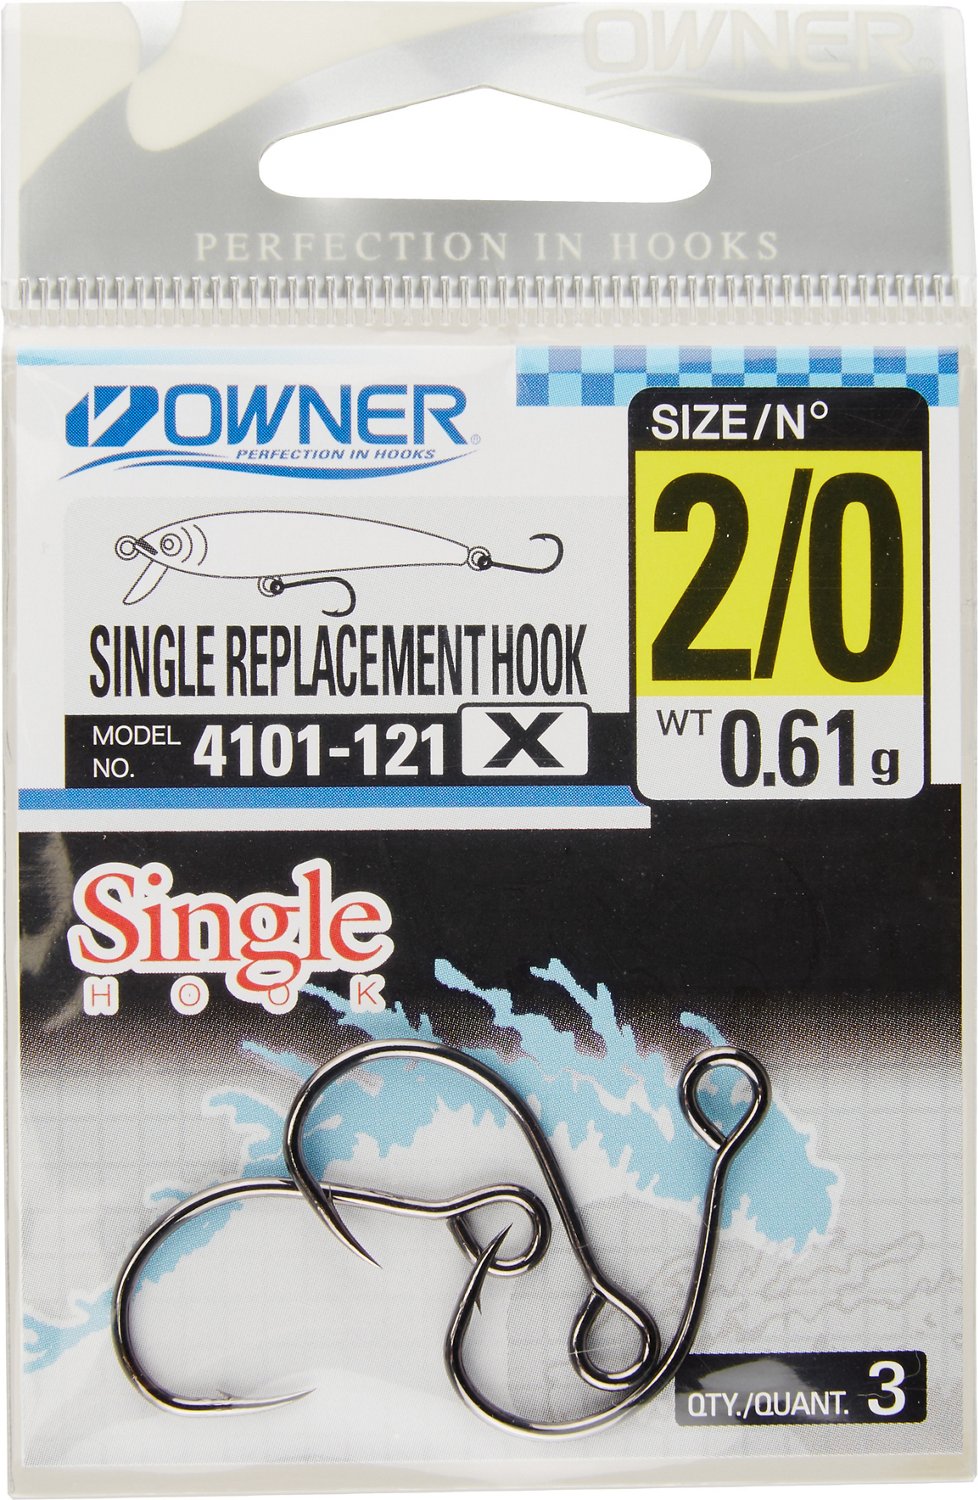 Owner Single Replacement Hook - 3X - Size 5/0